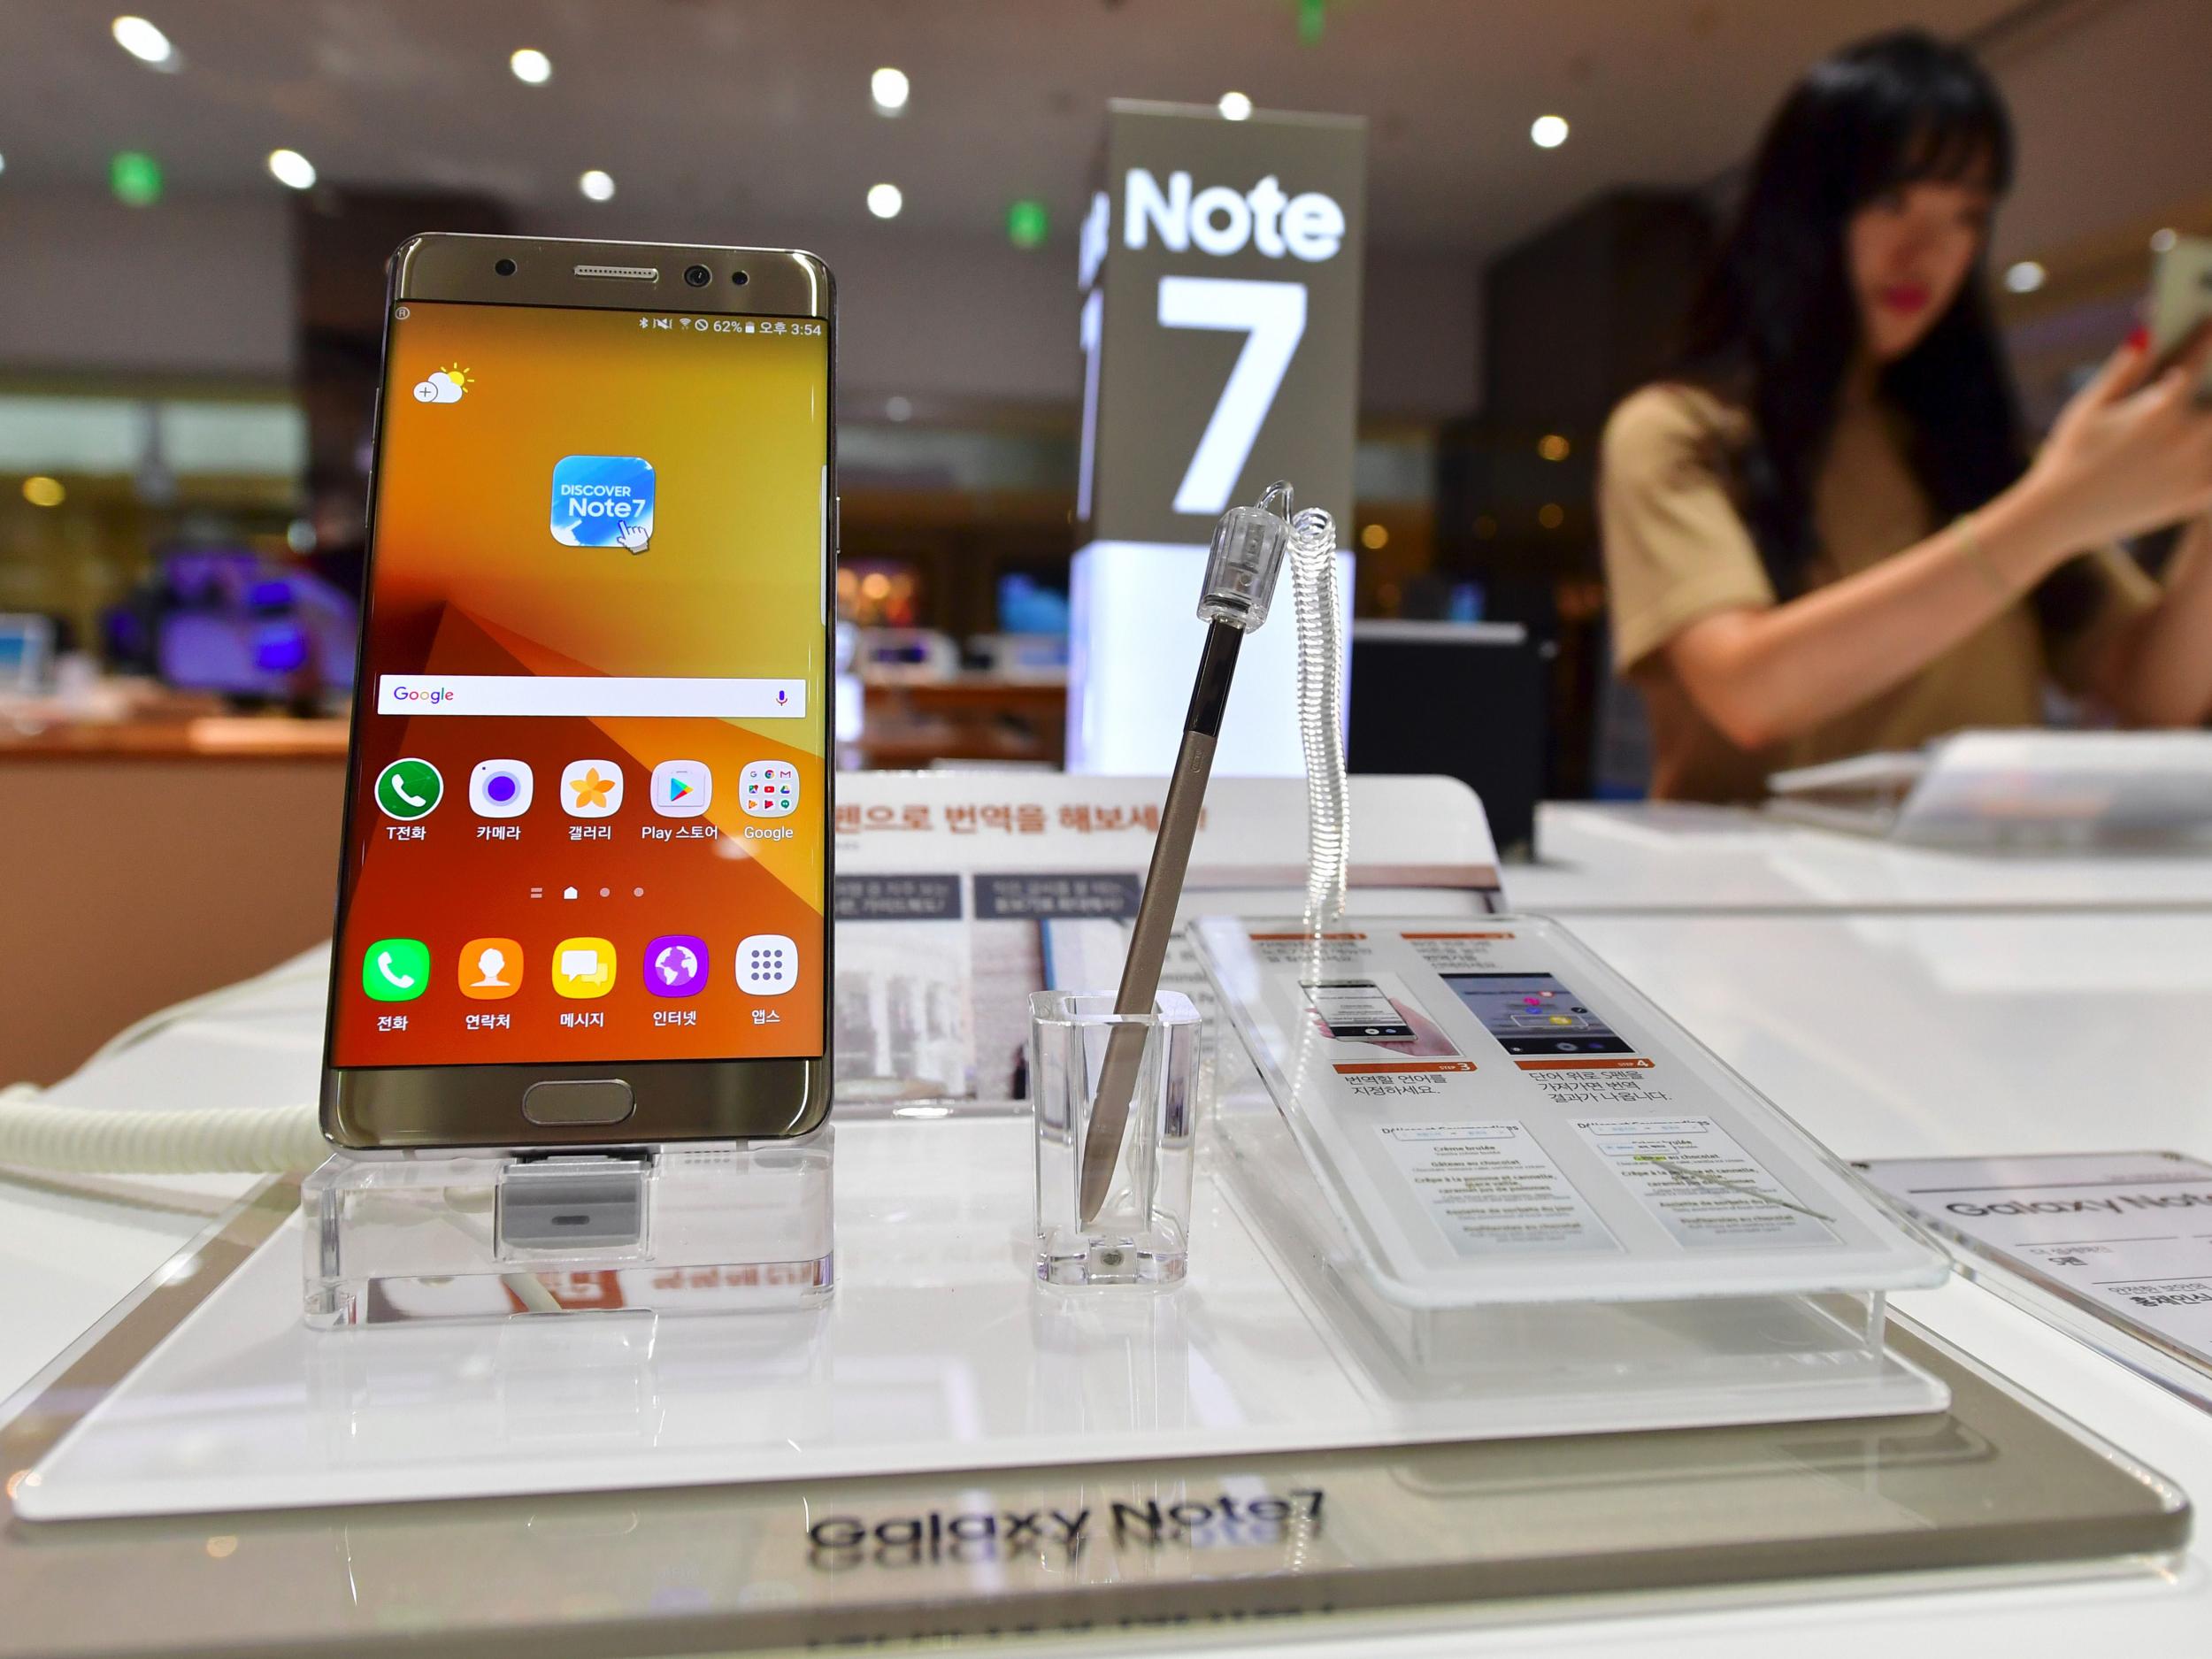 Samsung Galaxy Note 7 returning as cheaper 'FE' model designed not to explode